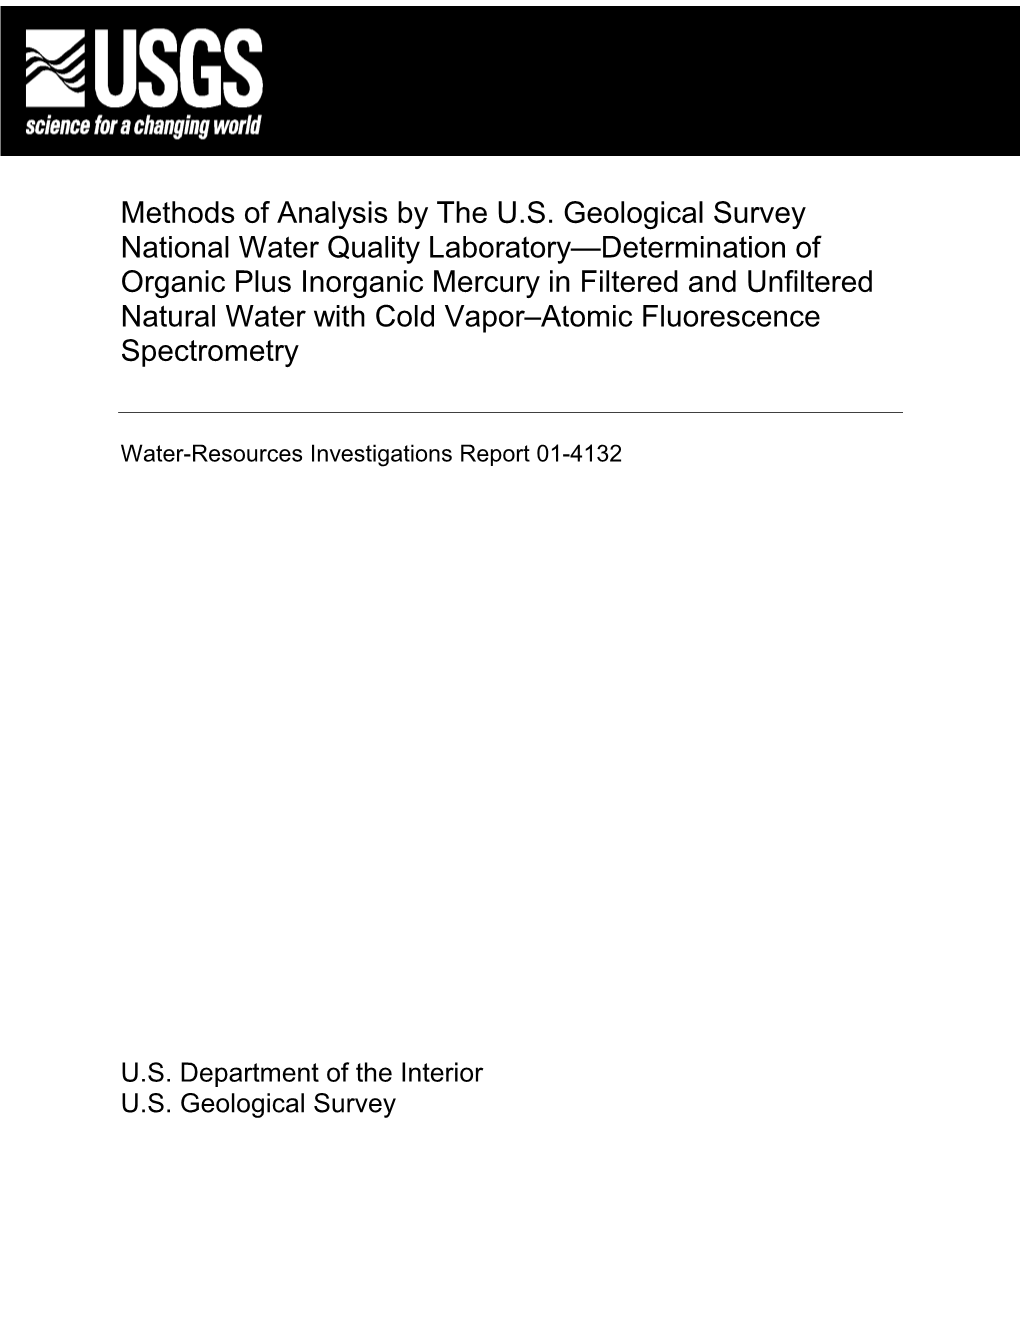 Methods of Analysis by the U.S